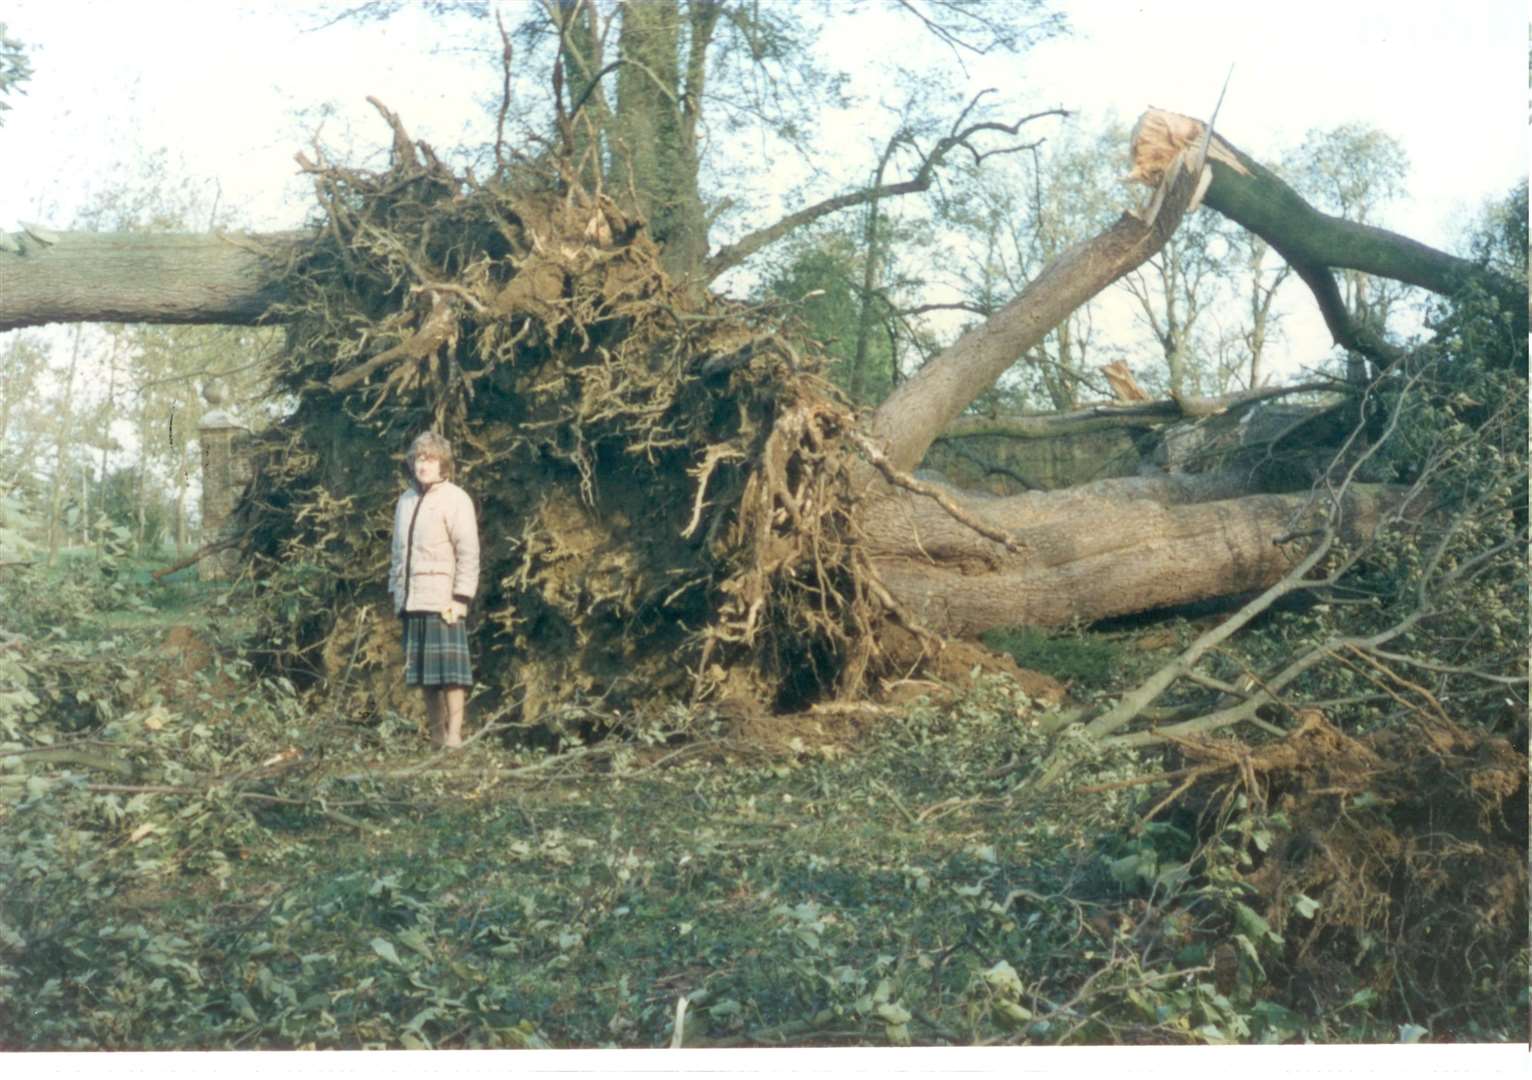 The roots of a large oak blown over at Godinton House, Ashford, after the Great Storm in October 1987